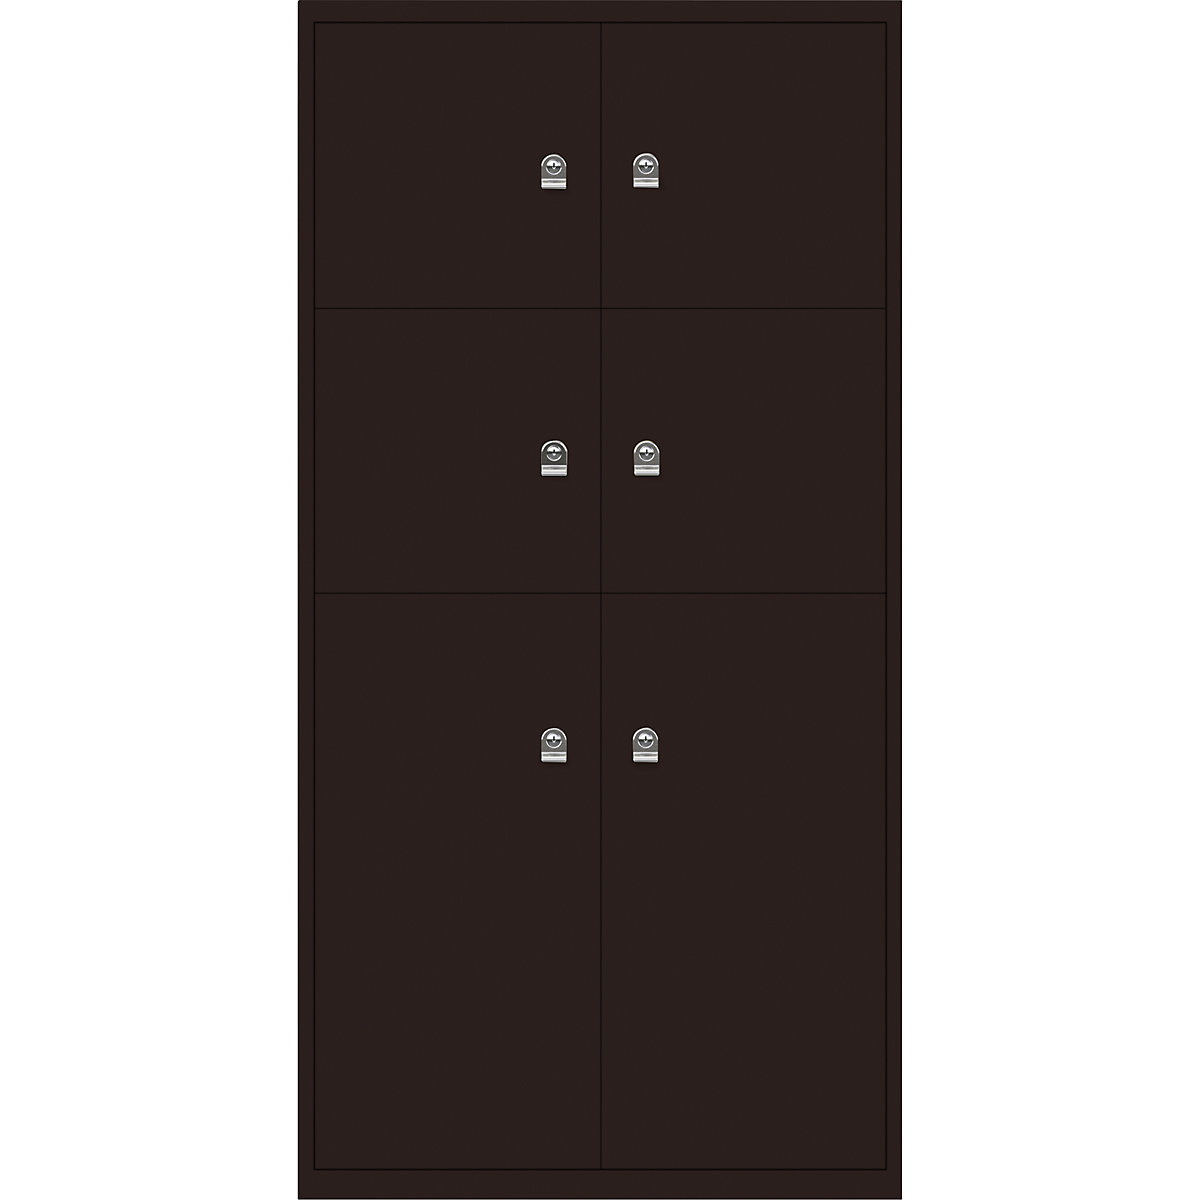 LateralFile™ lodge – BISLEY, with 6 lockable compartments, height 4 x 375 mm, 2 x 755 mm, sepia brown-4